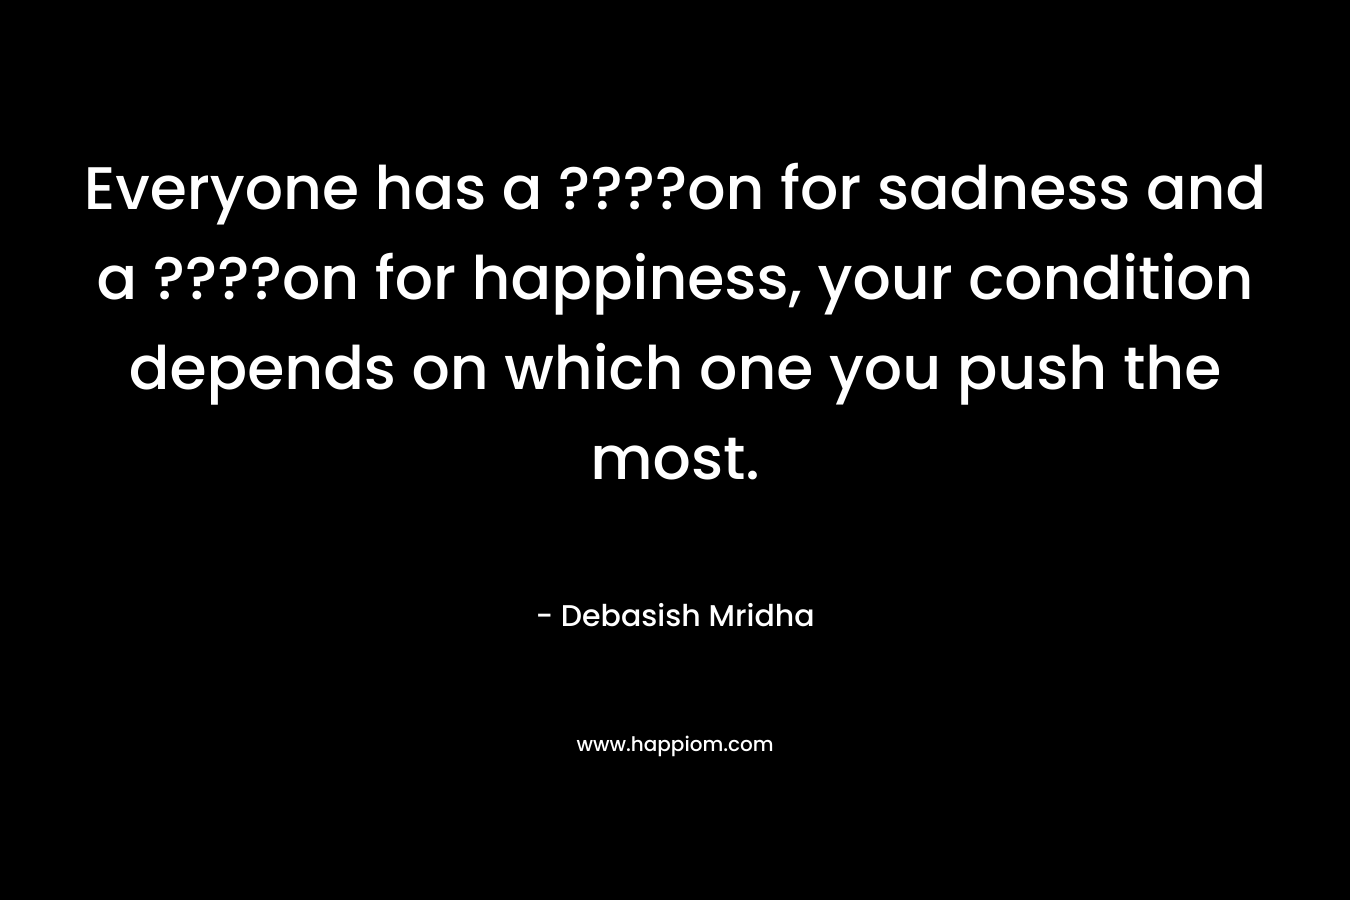 Everyone has a ????on for sadness and a ????on for happiness, your condition depends on which one you push the most.